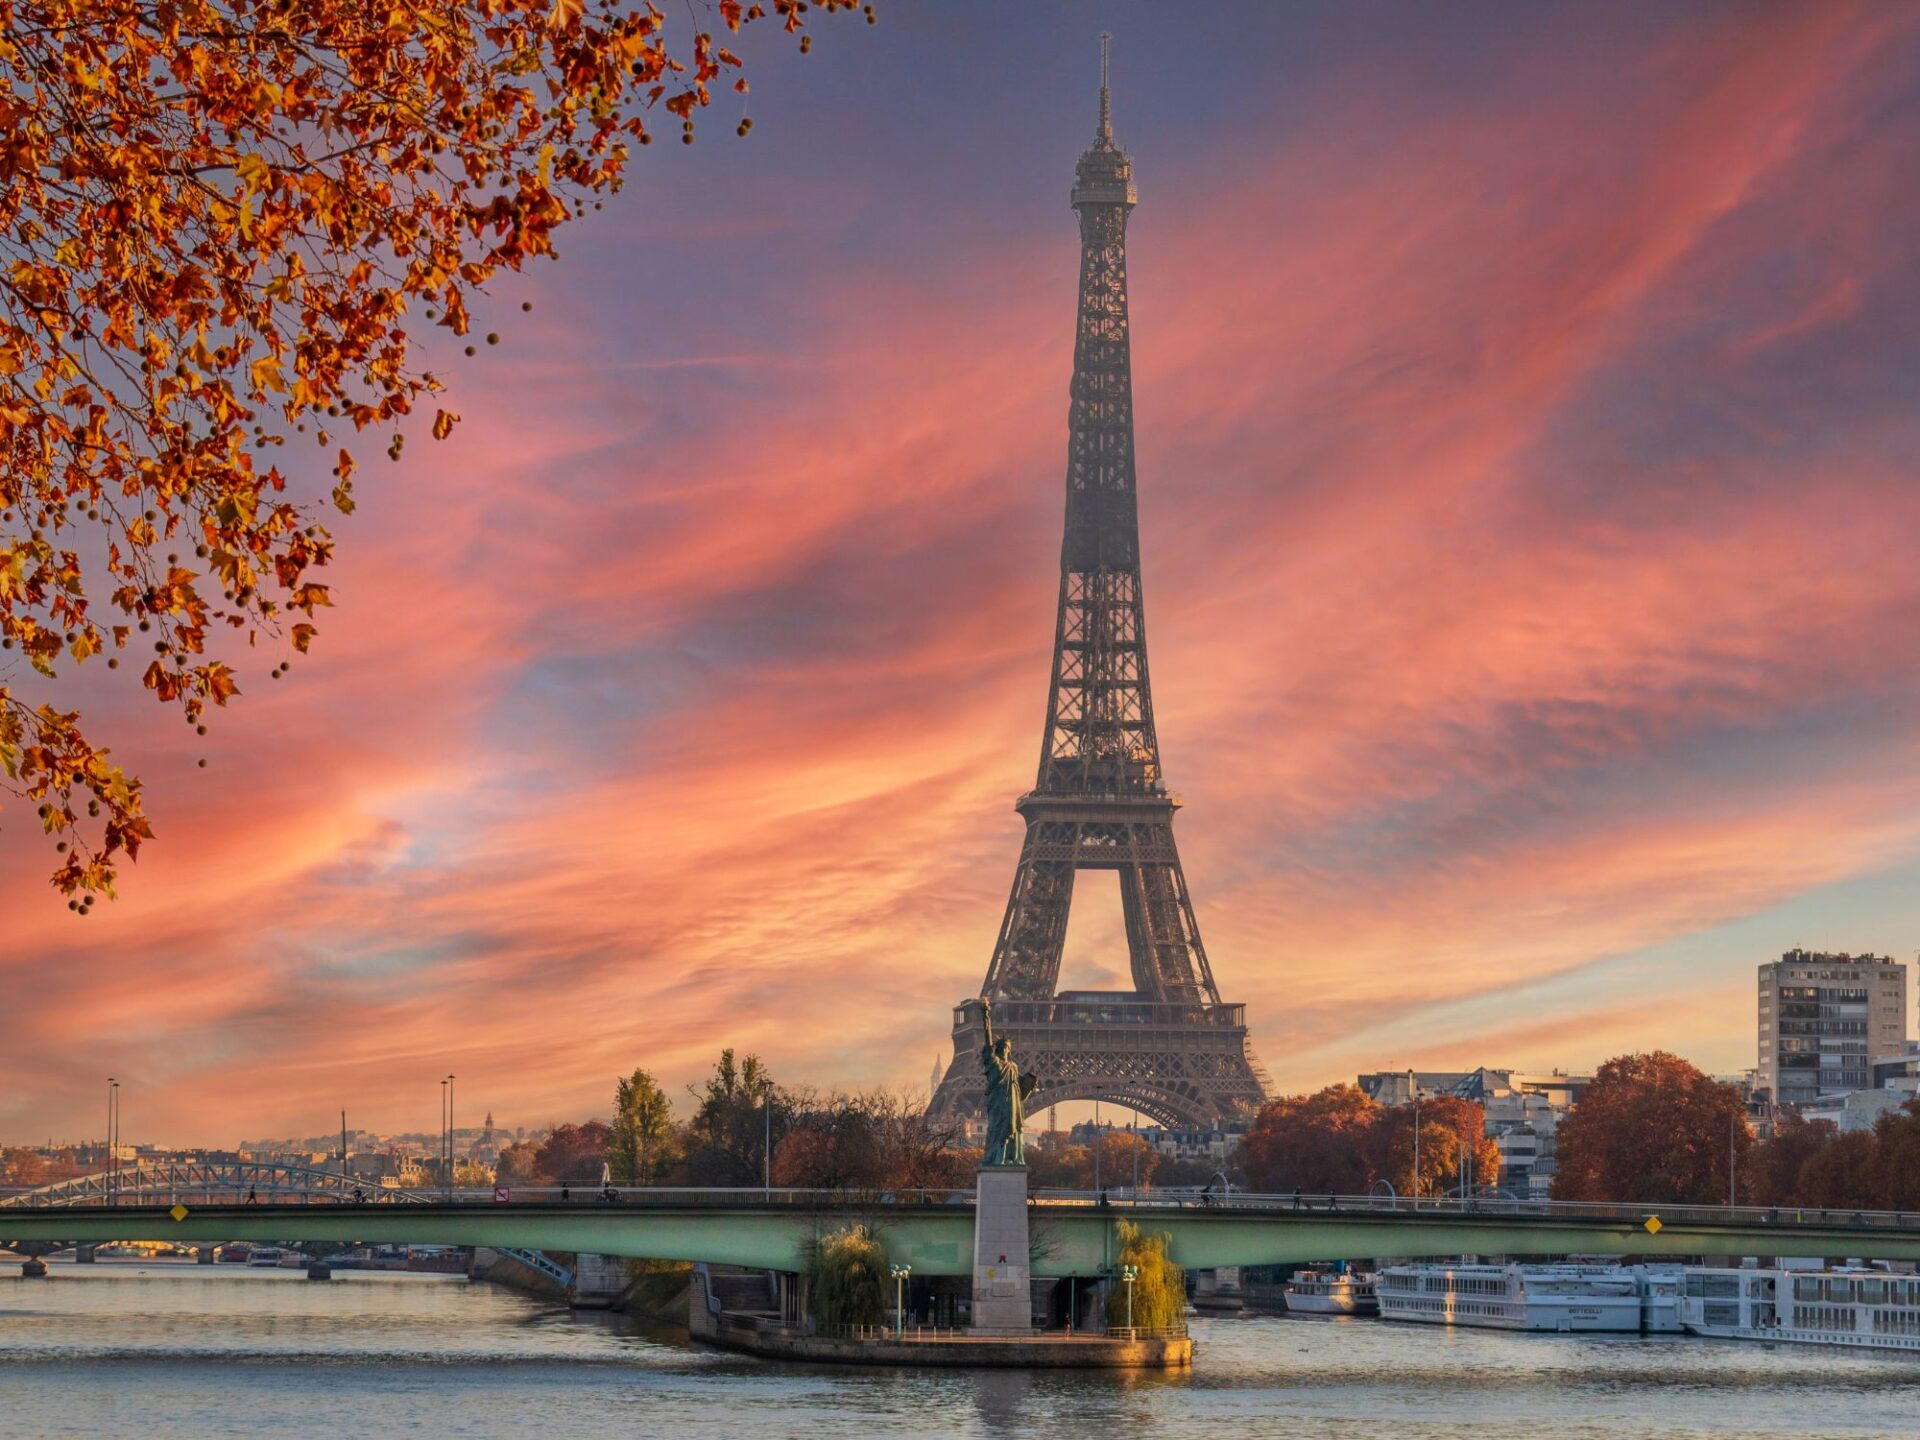 Things to do in Paris - Visit the iconic landmarks